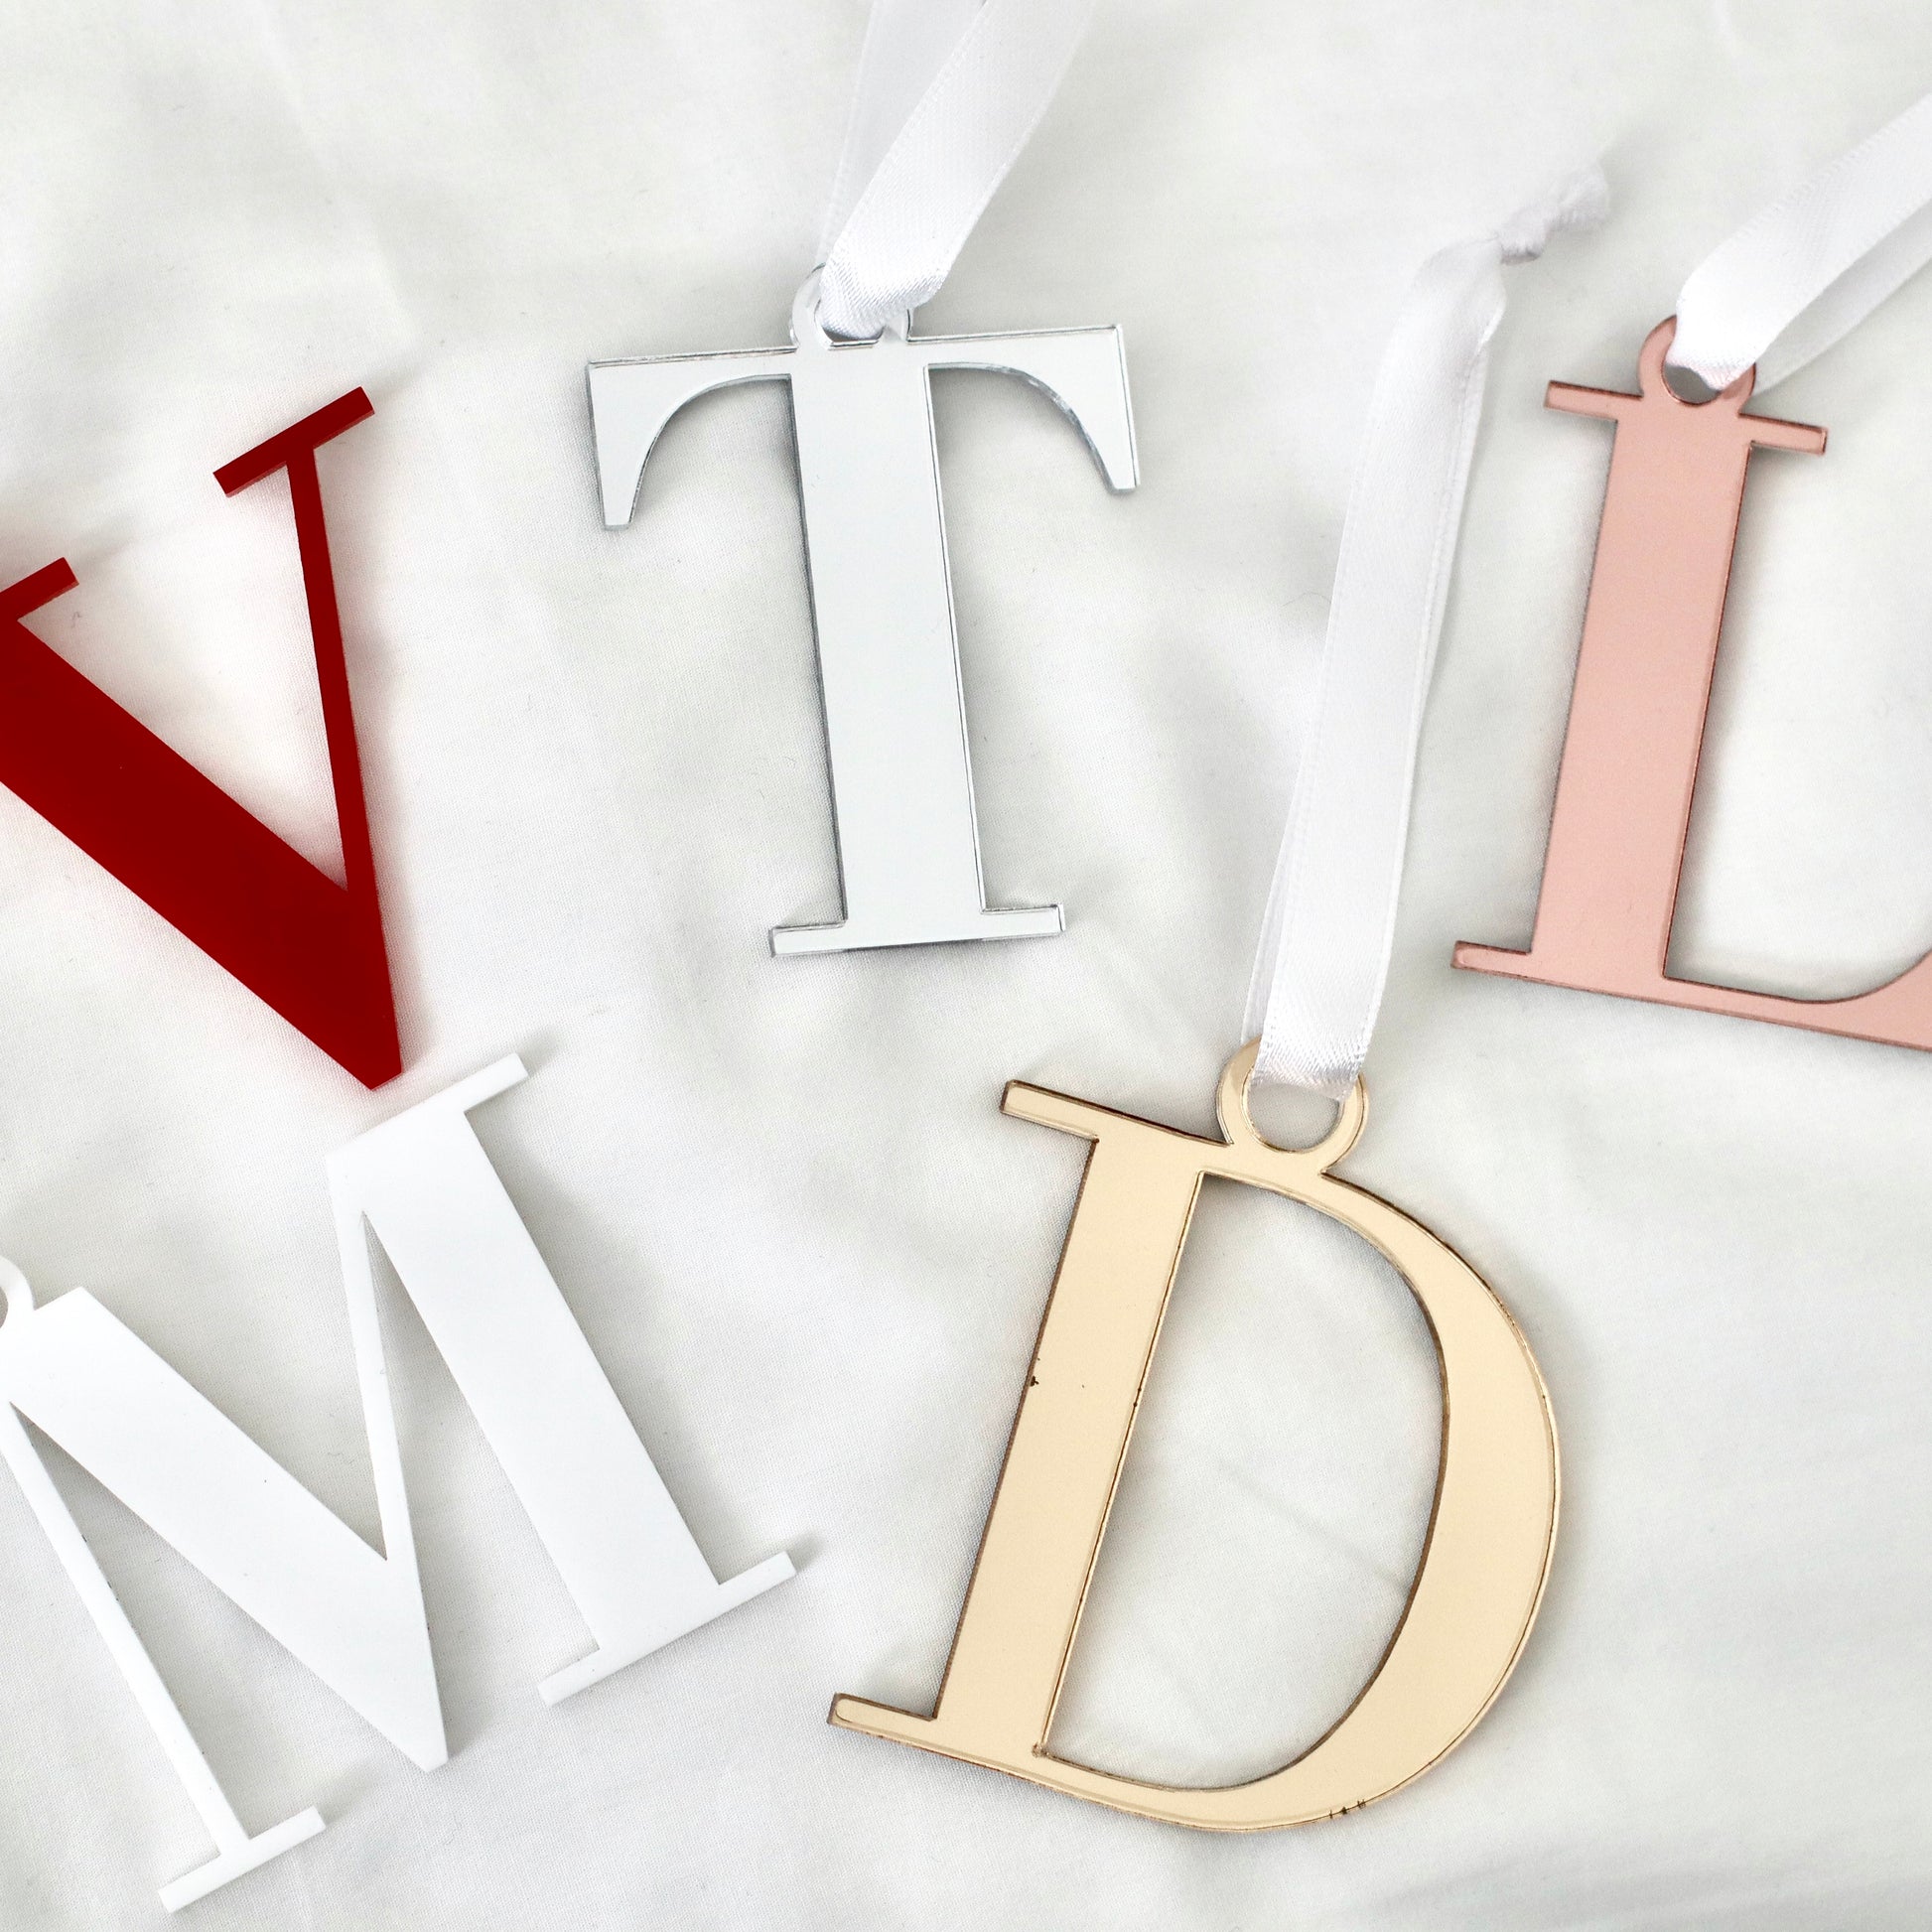 The initial baubles are perfect as a keepsake that add that bit of interest to your tree. Available in all letters for any name and initial.